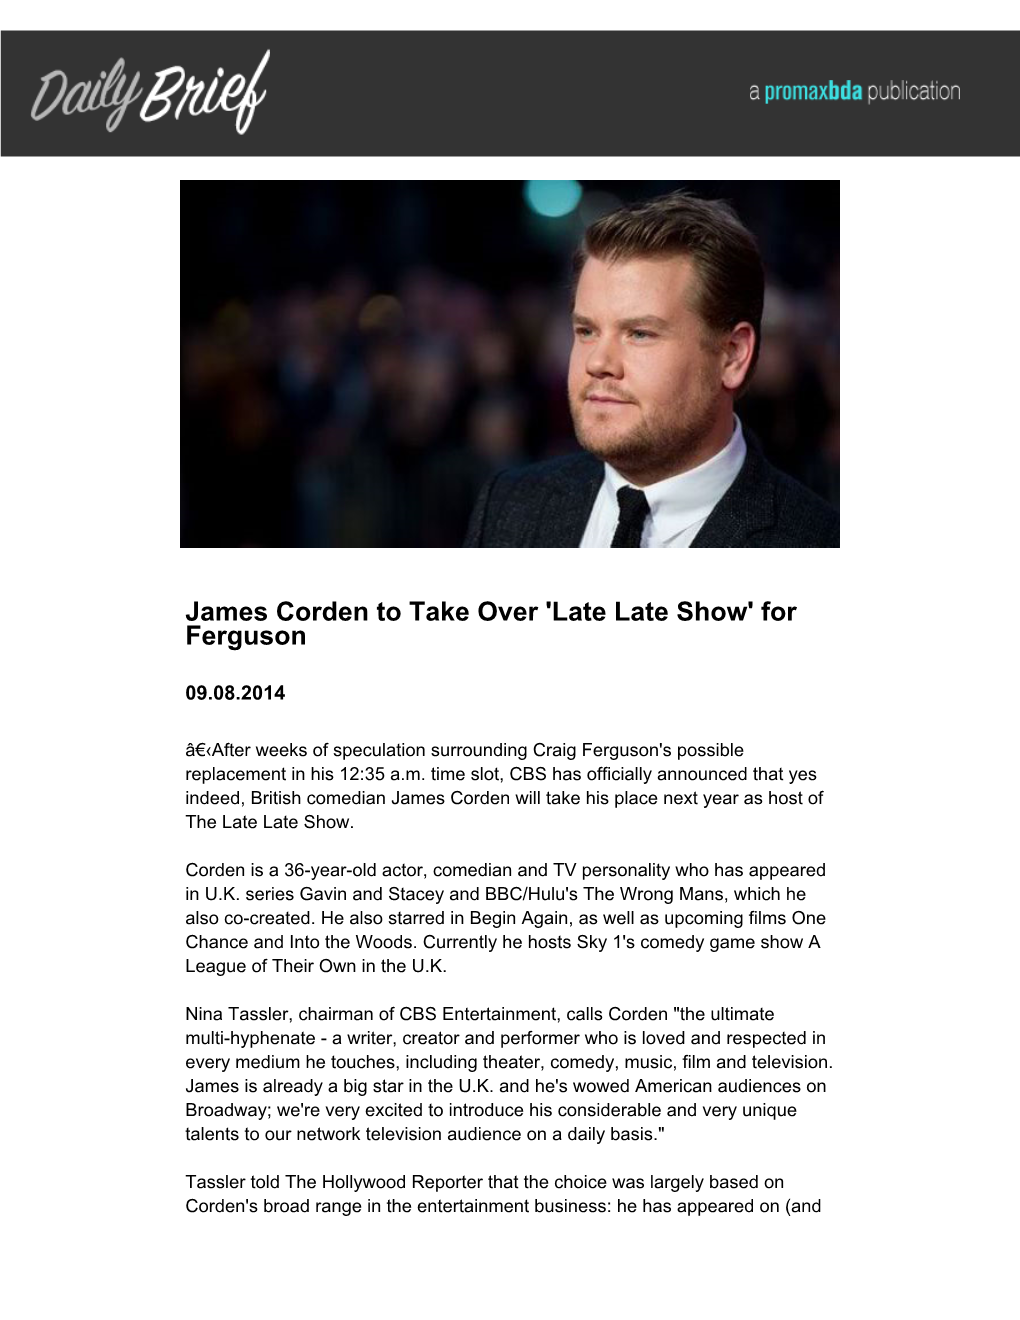 James Corden to Take Over 'Late Late Show' for Ferguson